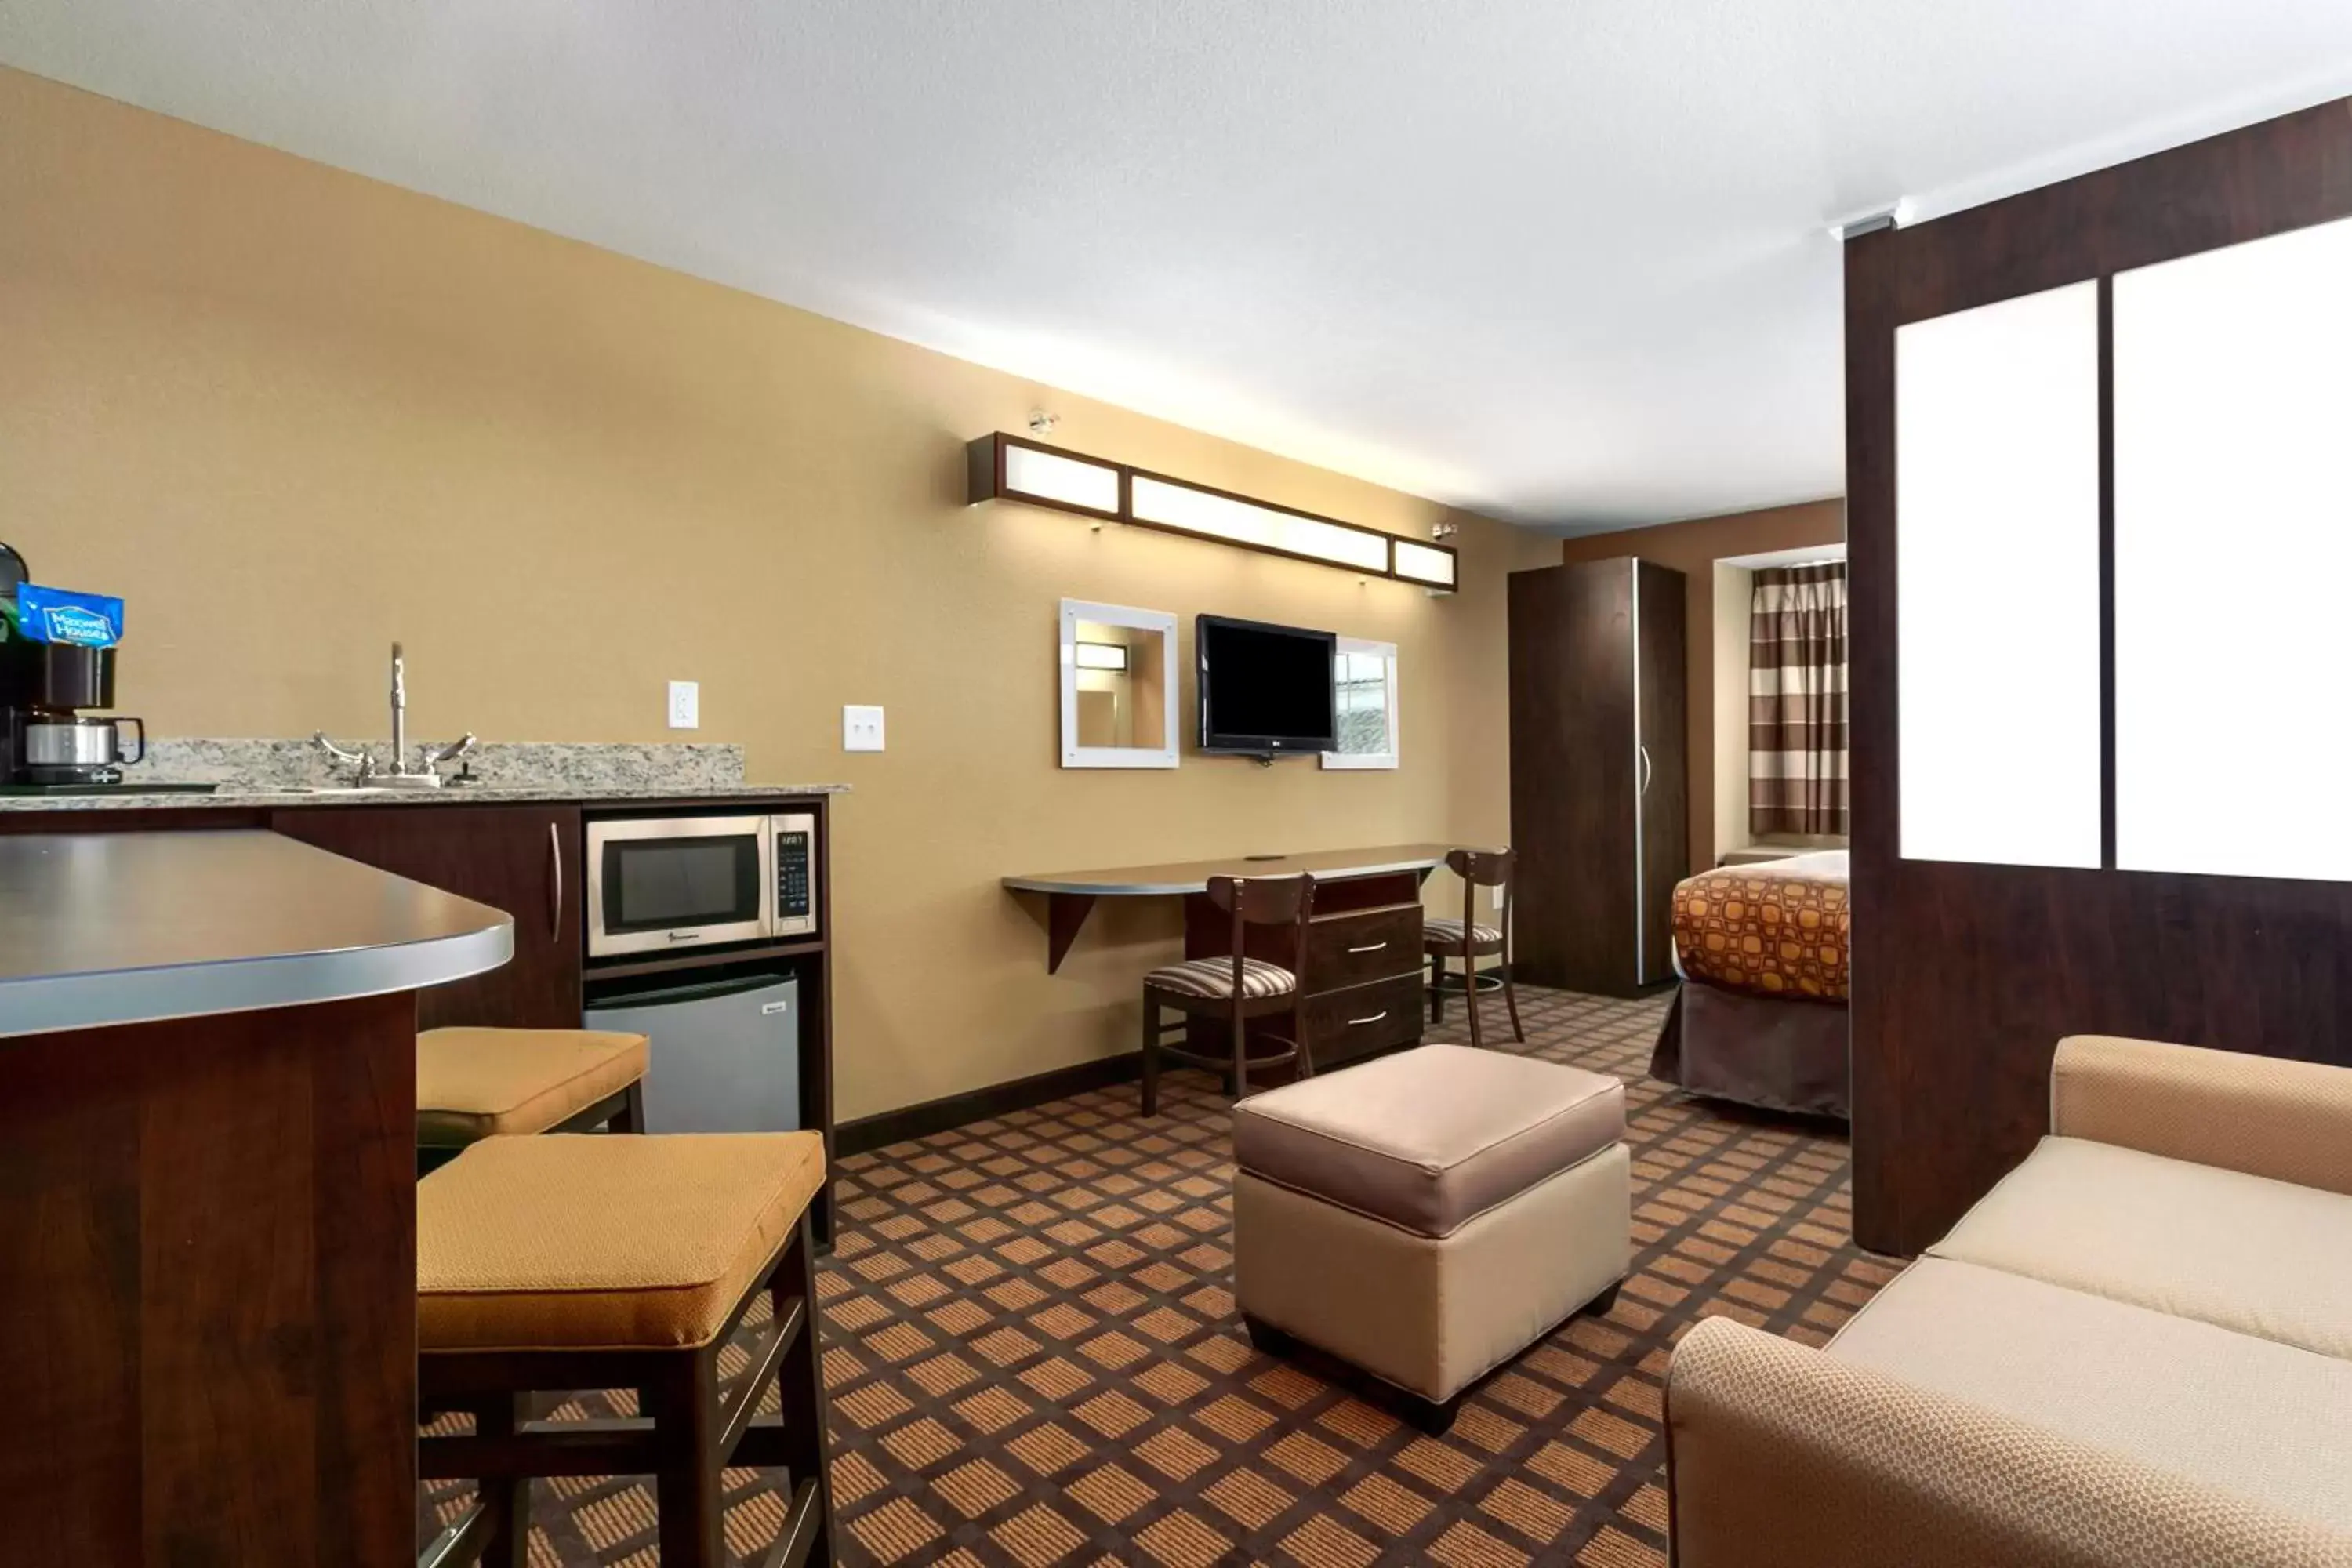 TV and multimedia in Microtel Inn & Suites by Wyndham Williston